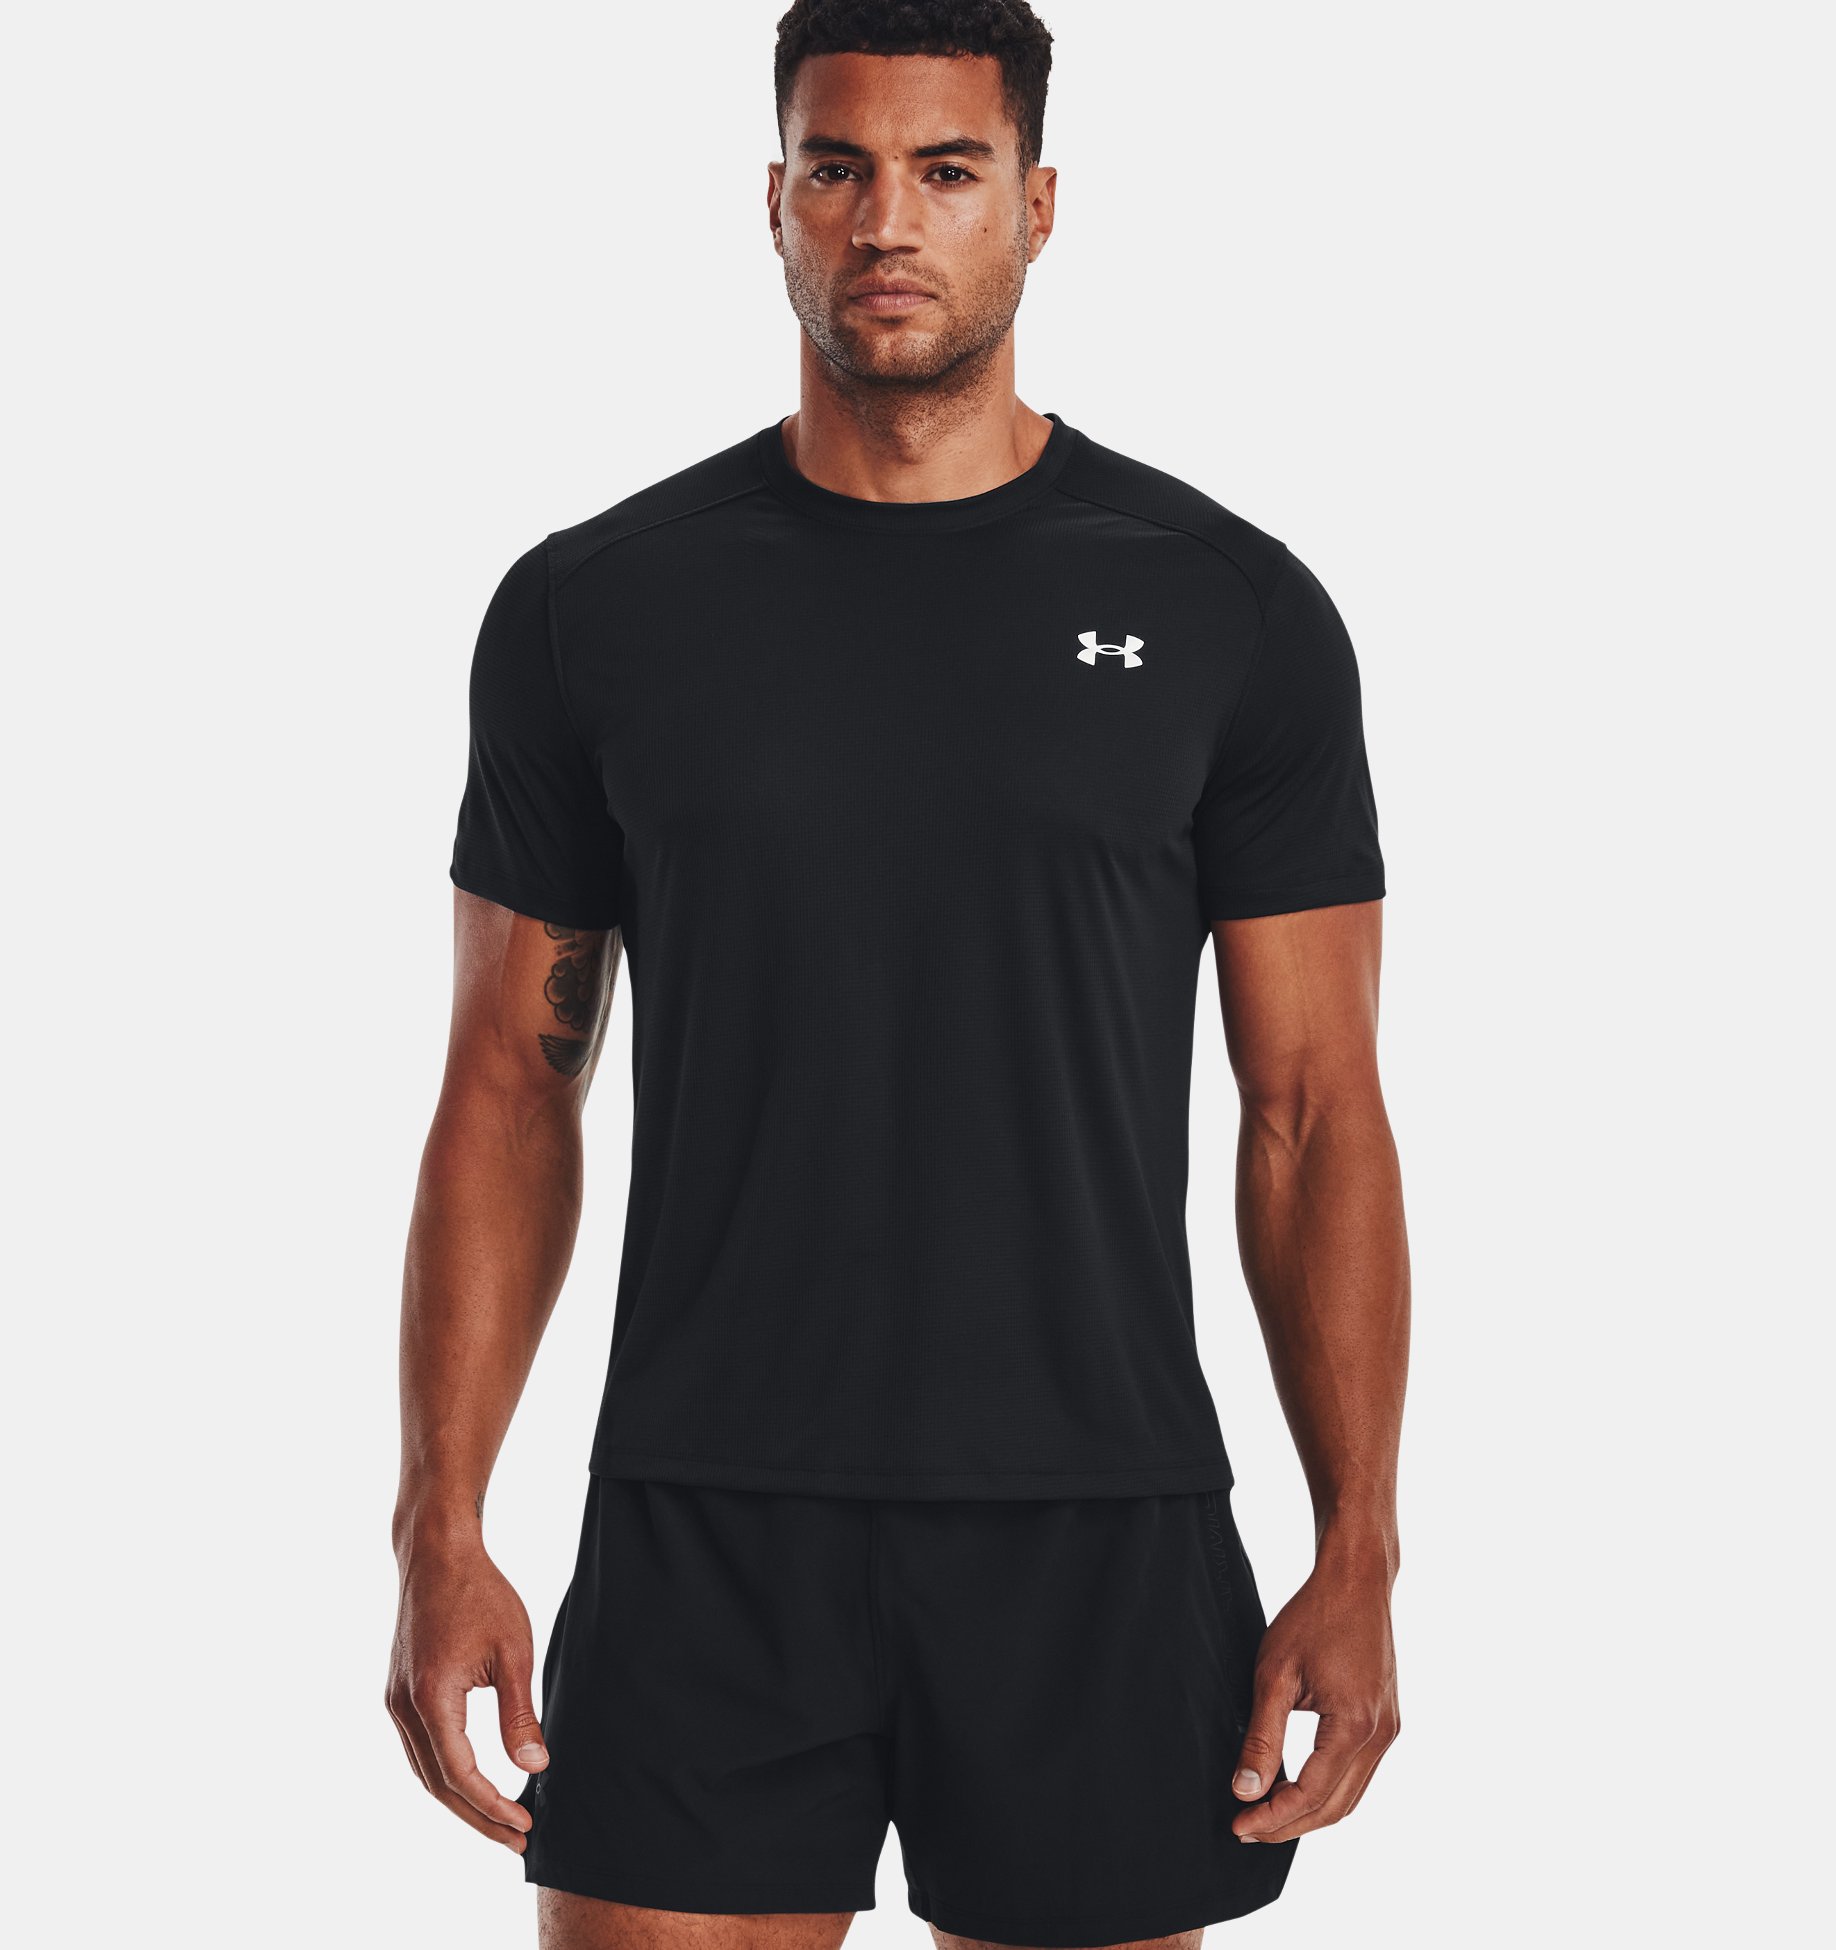 Under Armour Mens CoolSwitch Short Sleeve T-Shirt 